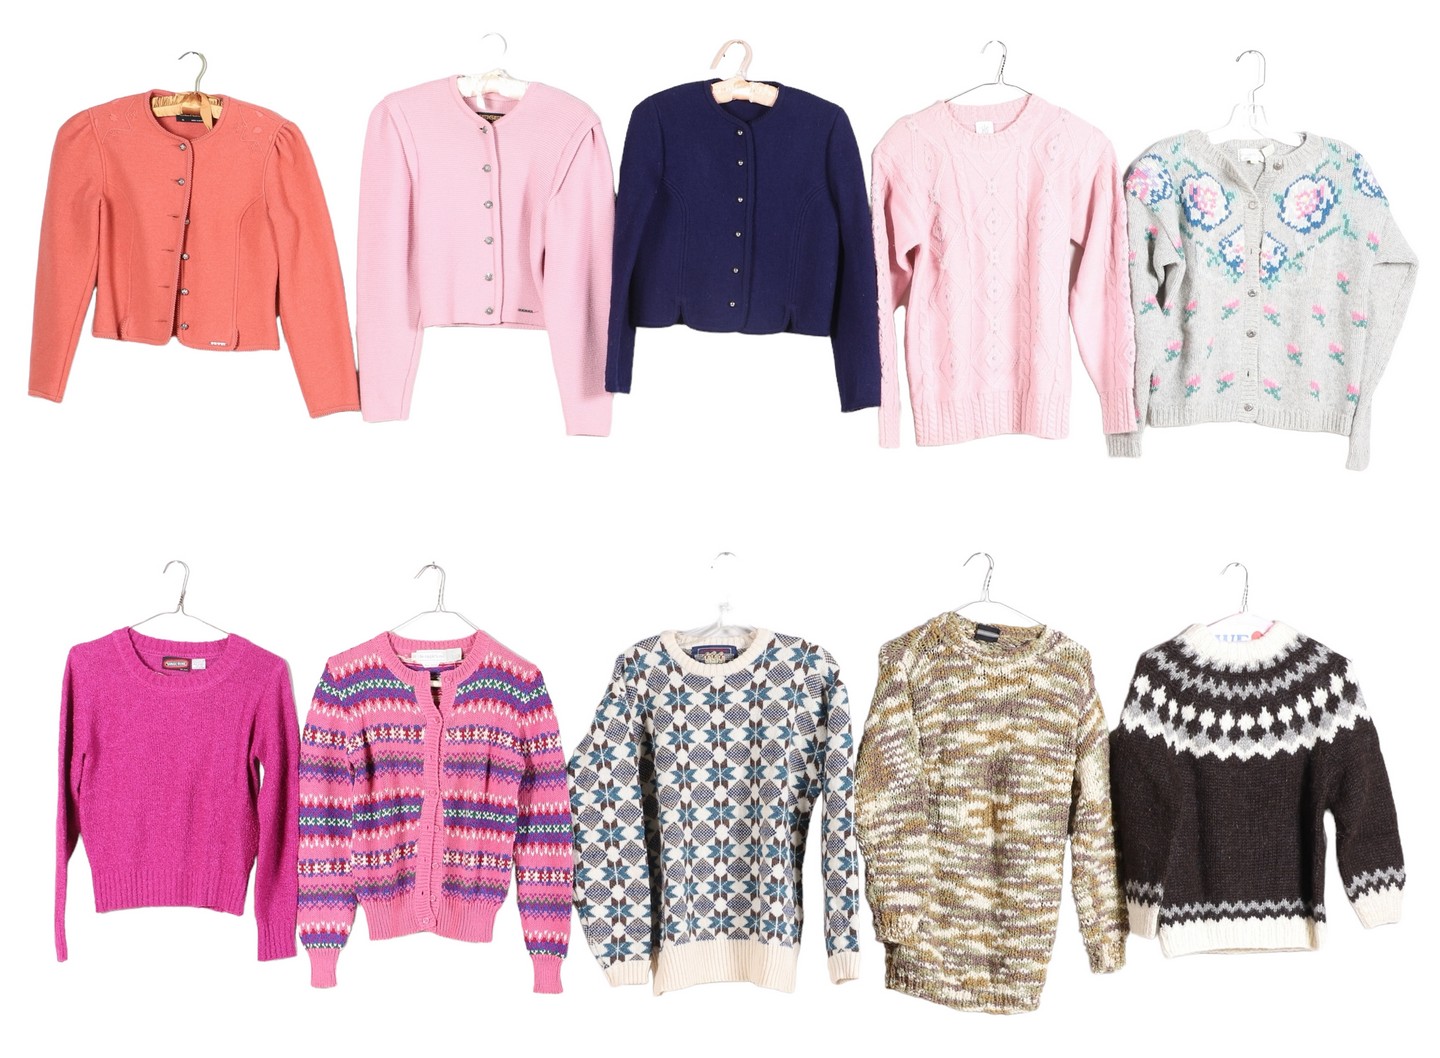  10 Vintage sweaters to include 27a749